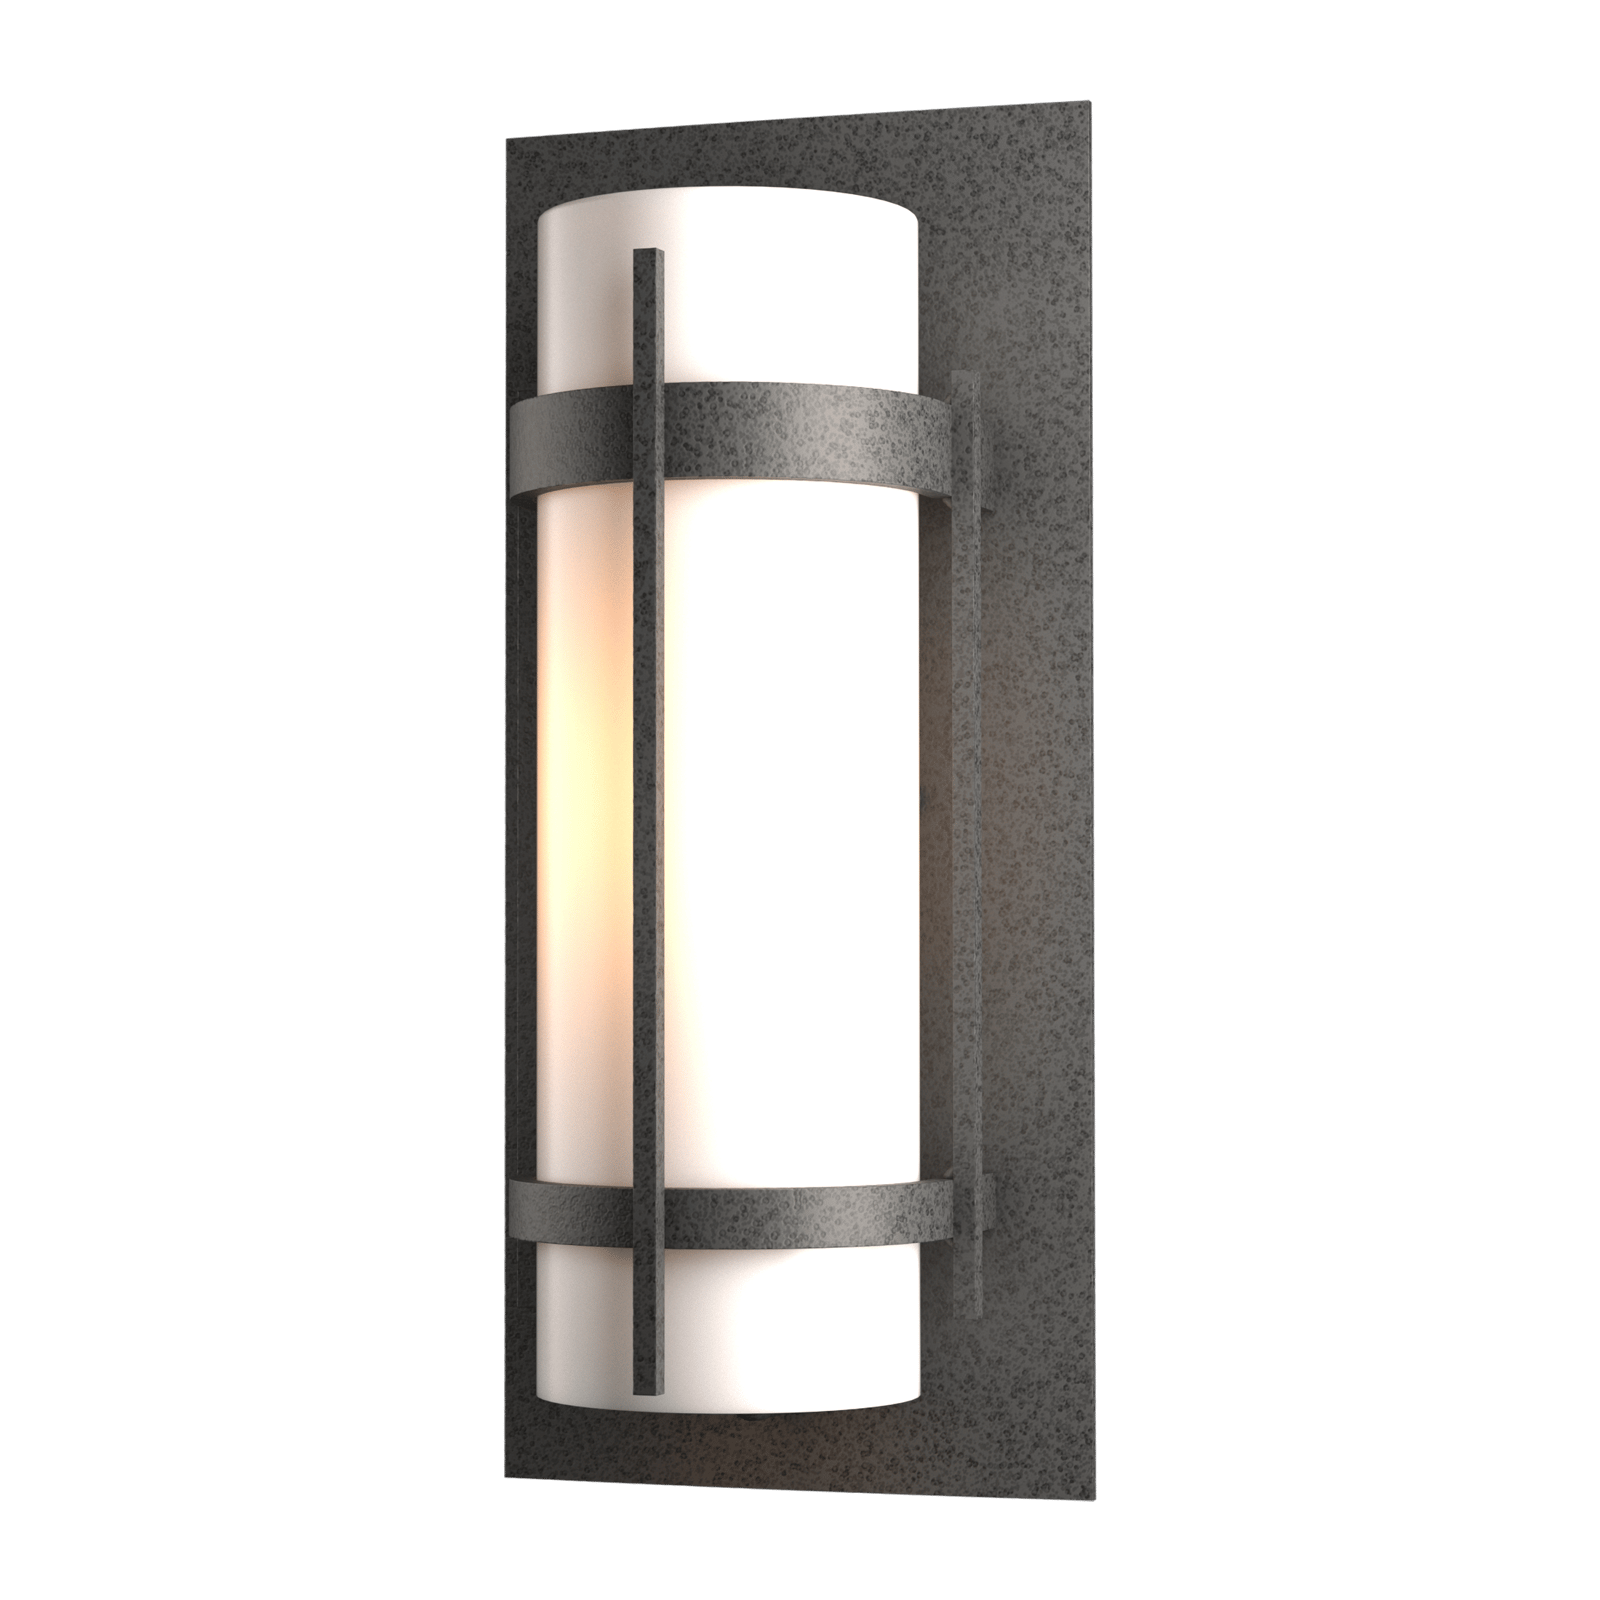 Hubbardton Forge Banded Outdoor Sconce Outdoor l Wall Hubbardton Forge Coastal Natural Iron  